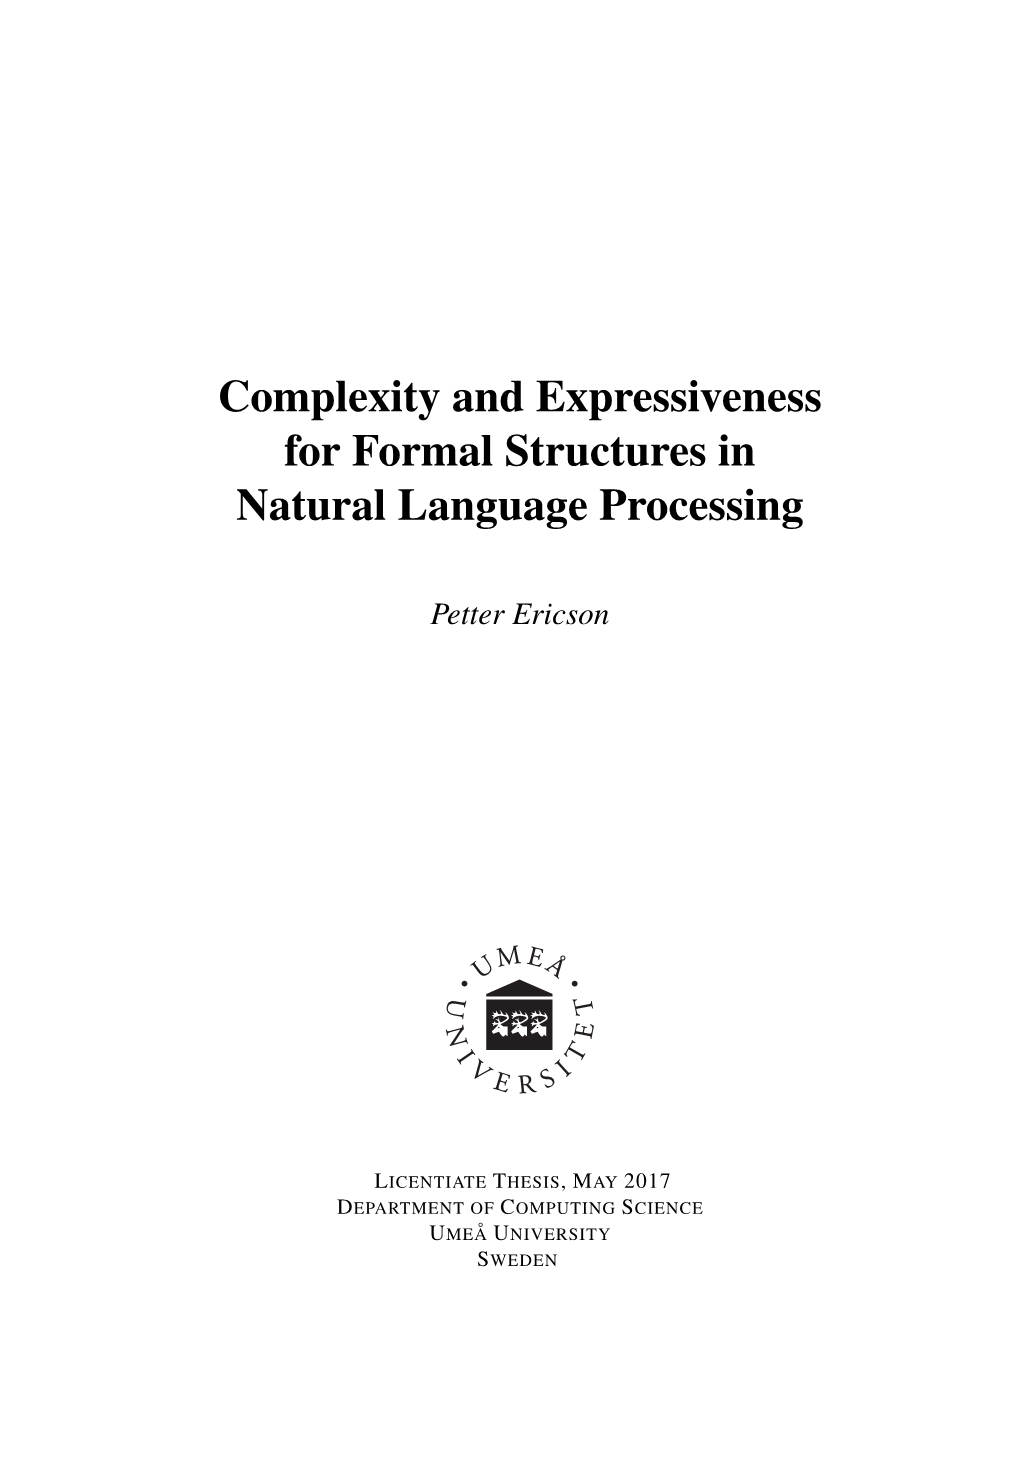 Complexity and Expressiveness for Formal Structures in Natural Language Processing